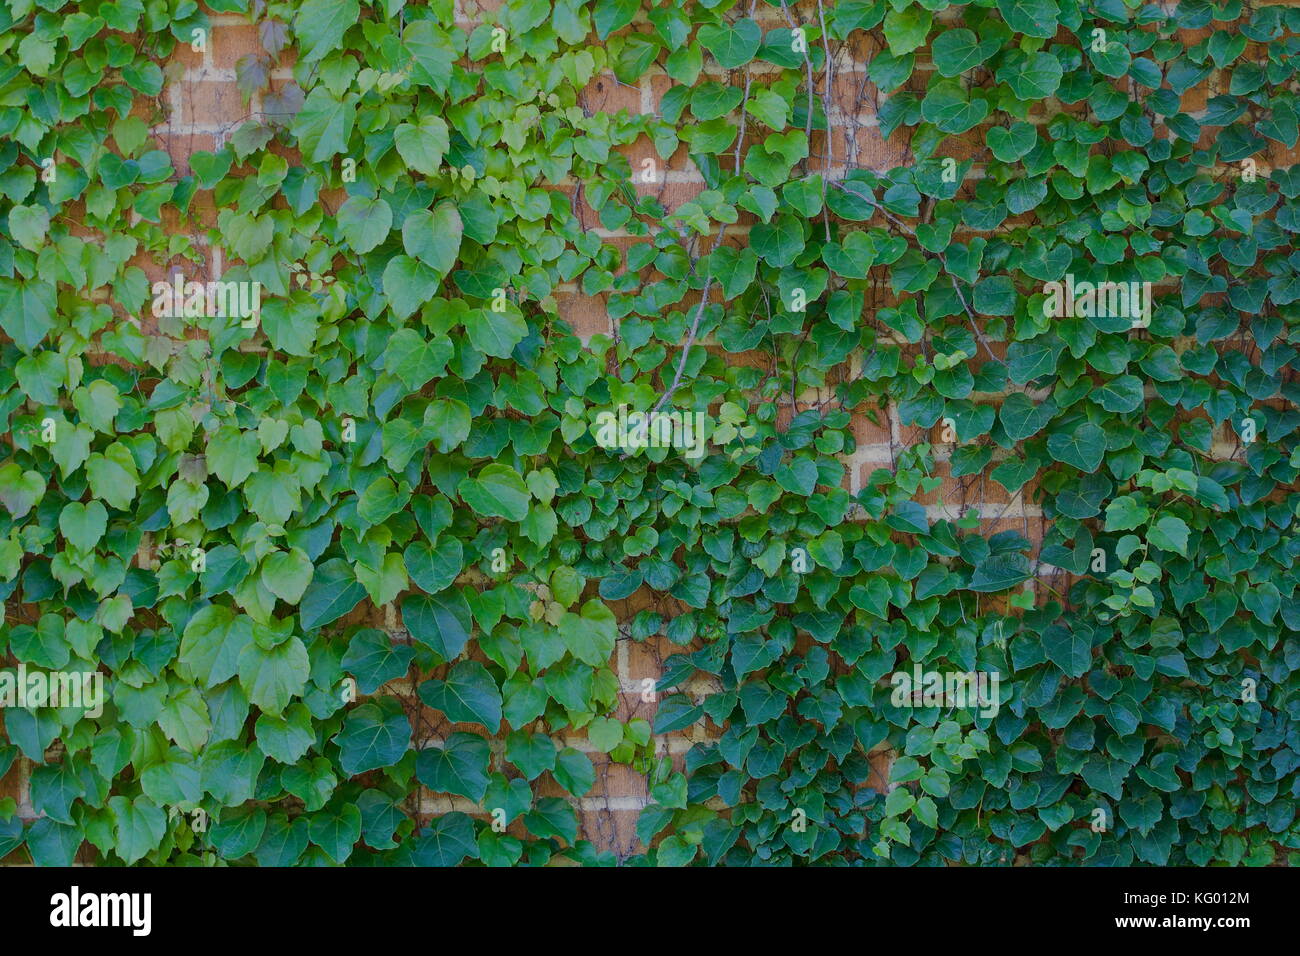 Brick wall with green vines Stock Photo